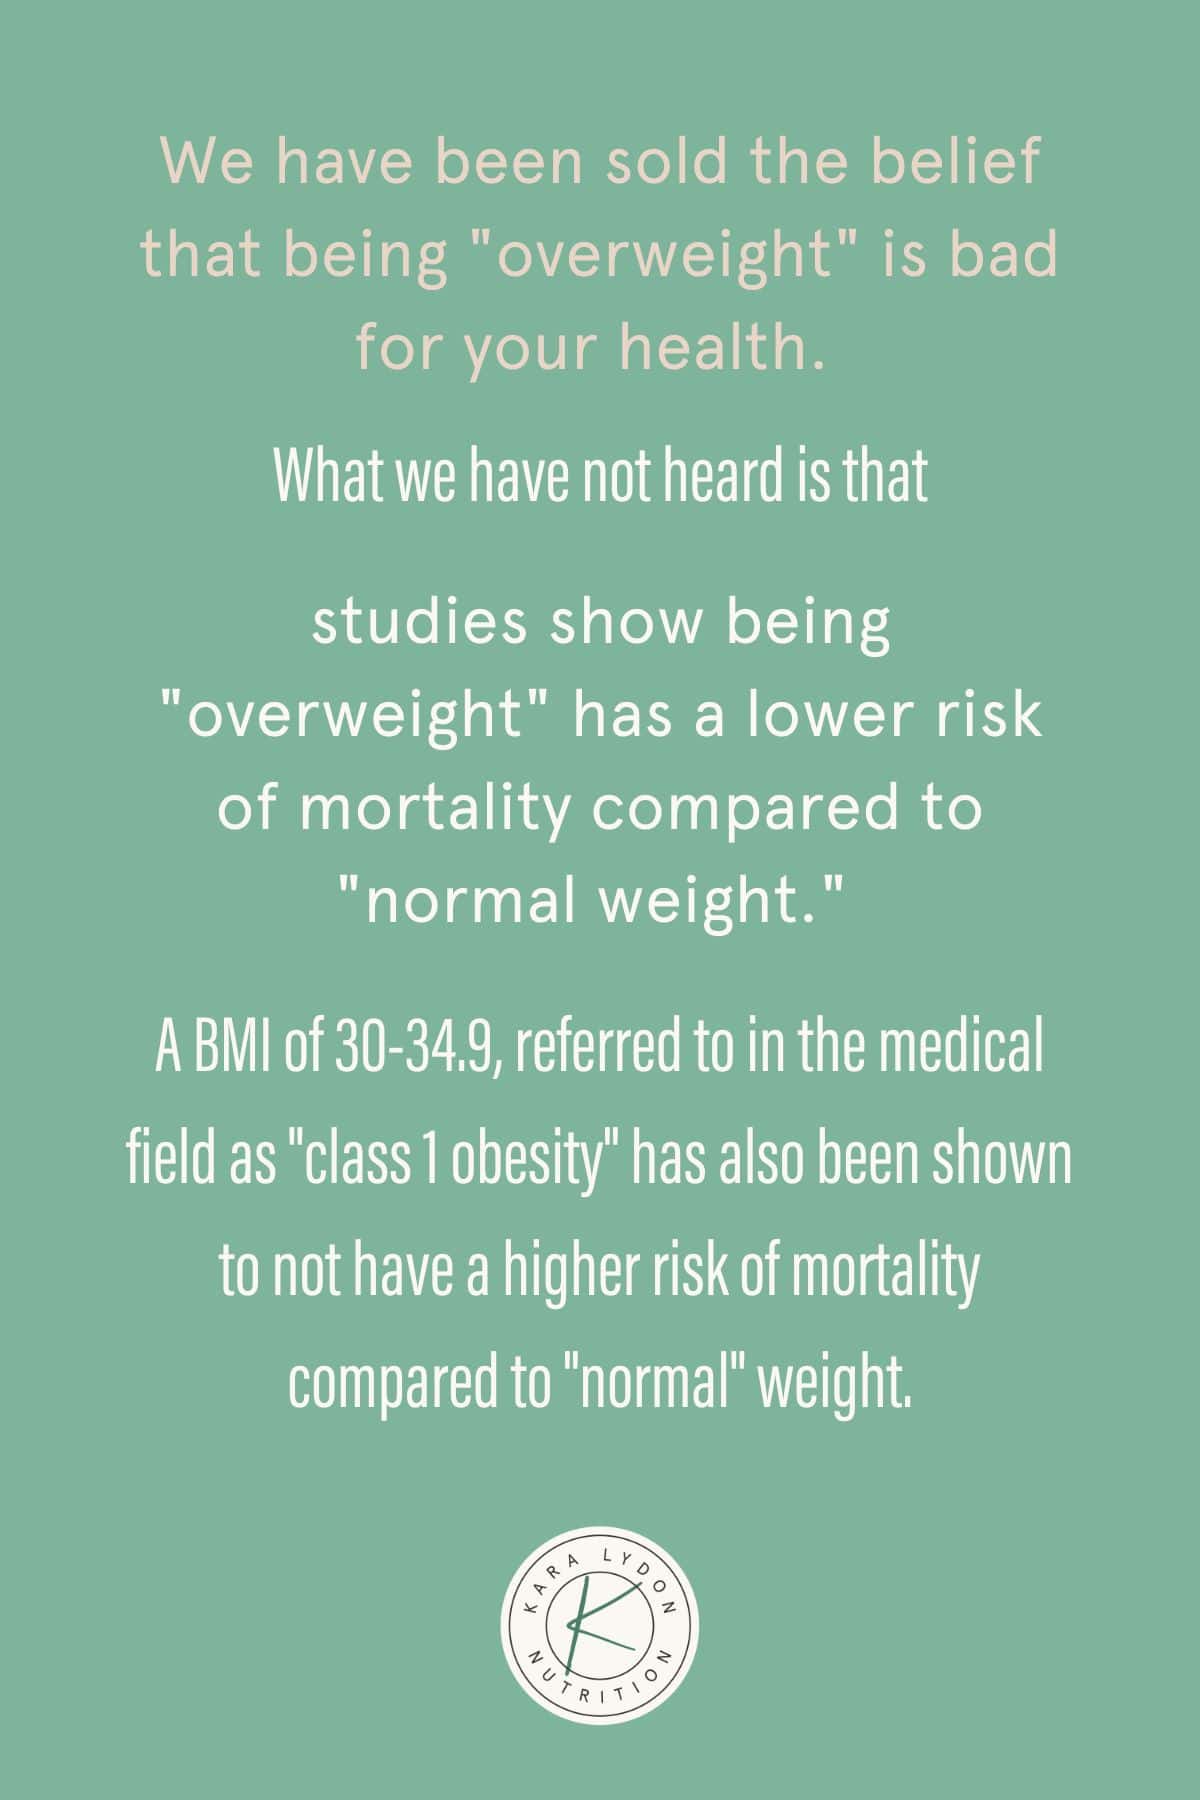 Graphic with quote: "We have been sold the belief that it is "overweight" it is bad for your health.  What we haven't heard is that studies show it exists "overweight" has a lower mortality risk compared to "Normal weight." A BMI of 30-34.9, referred to in the medical field as "obesity category 1" has also been shown not to have a higher risk of mortality compared to "normal" weight."